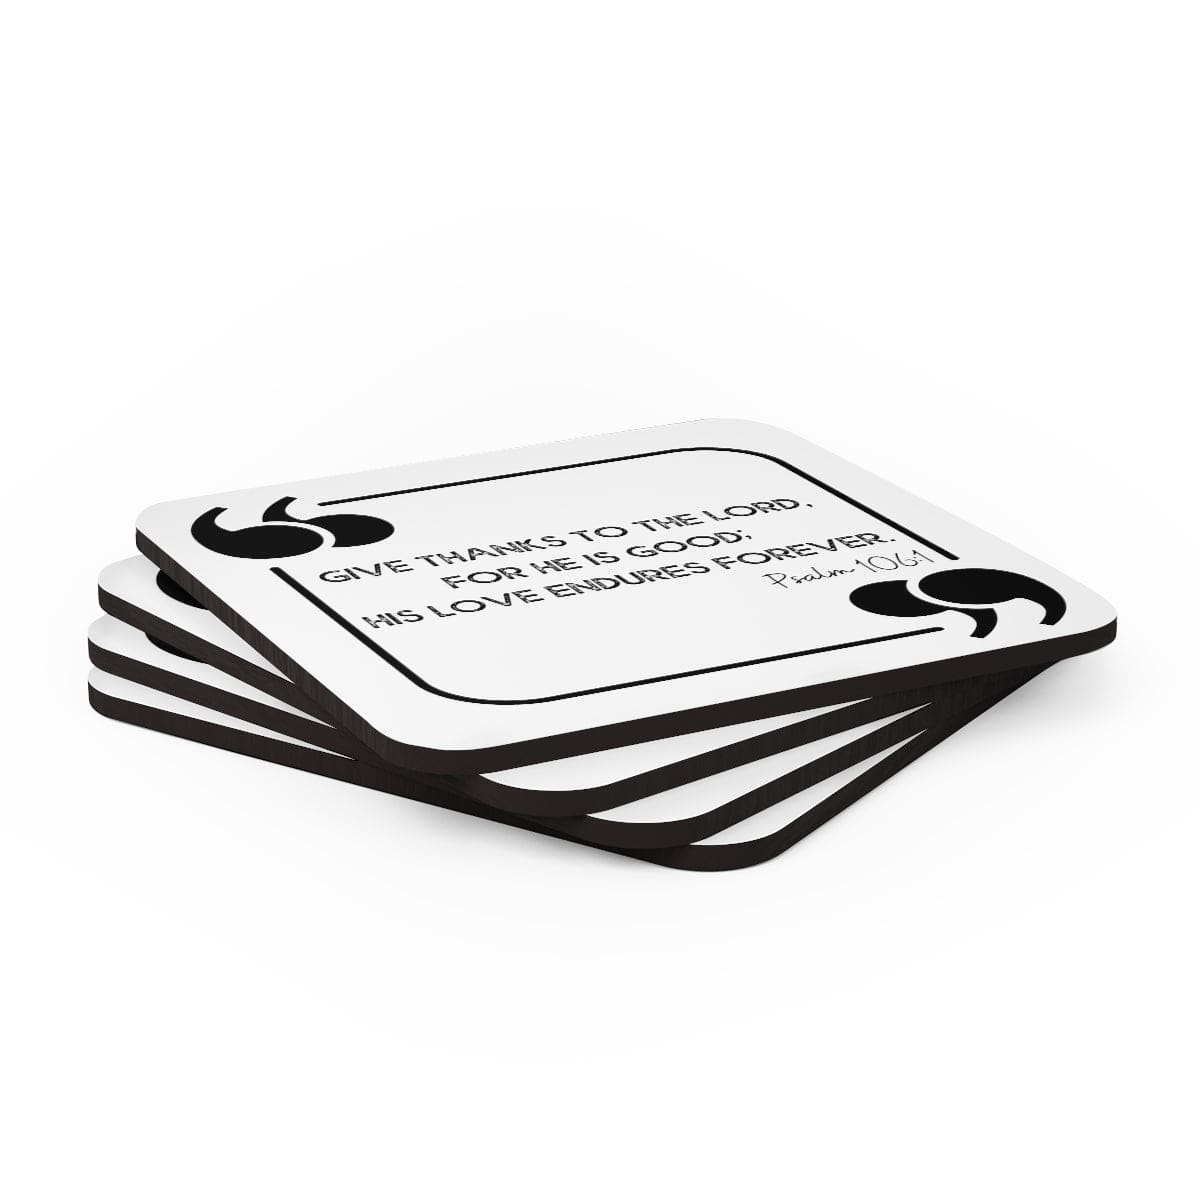 Home Decor Coaster Set - 4 Piece Home/office Give Thanks To The Lord Christian